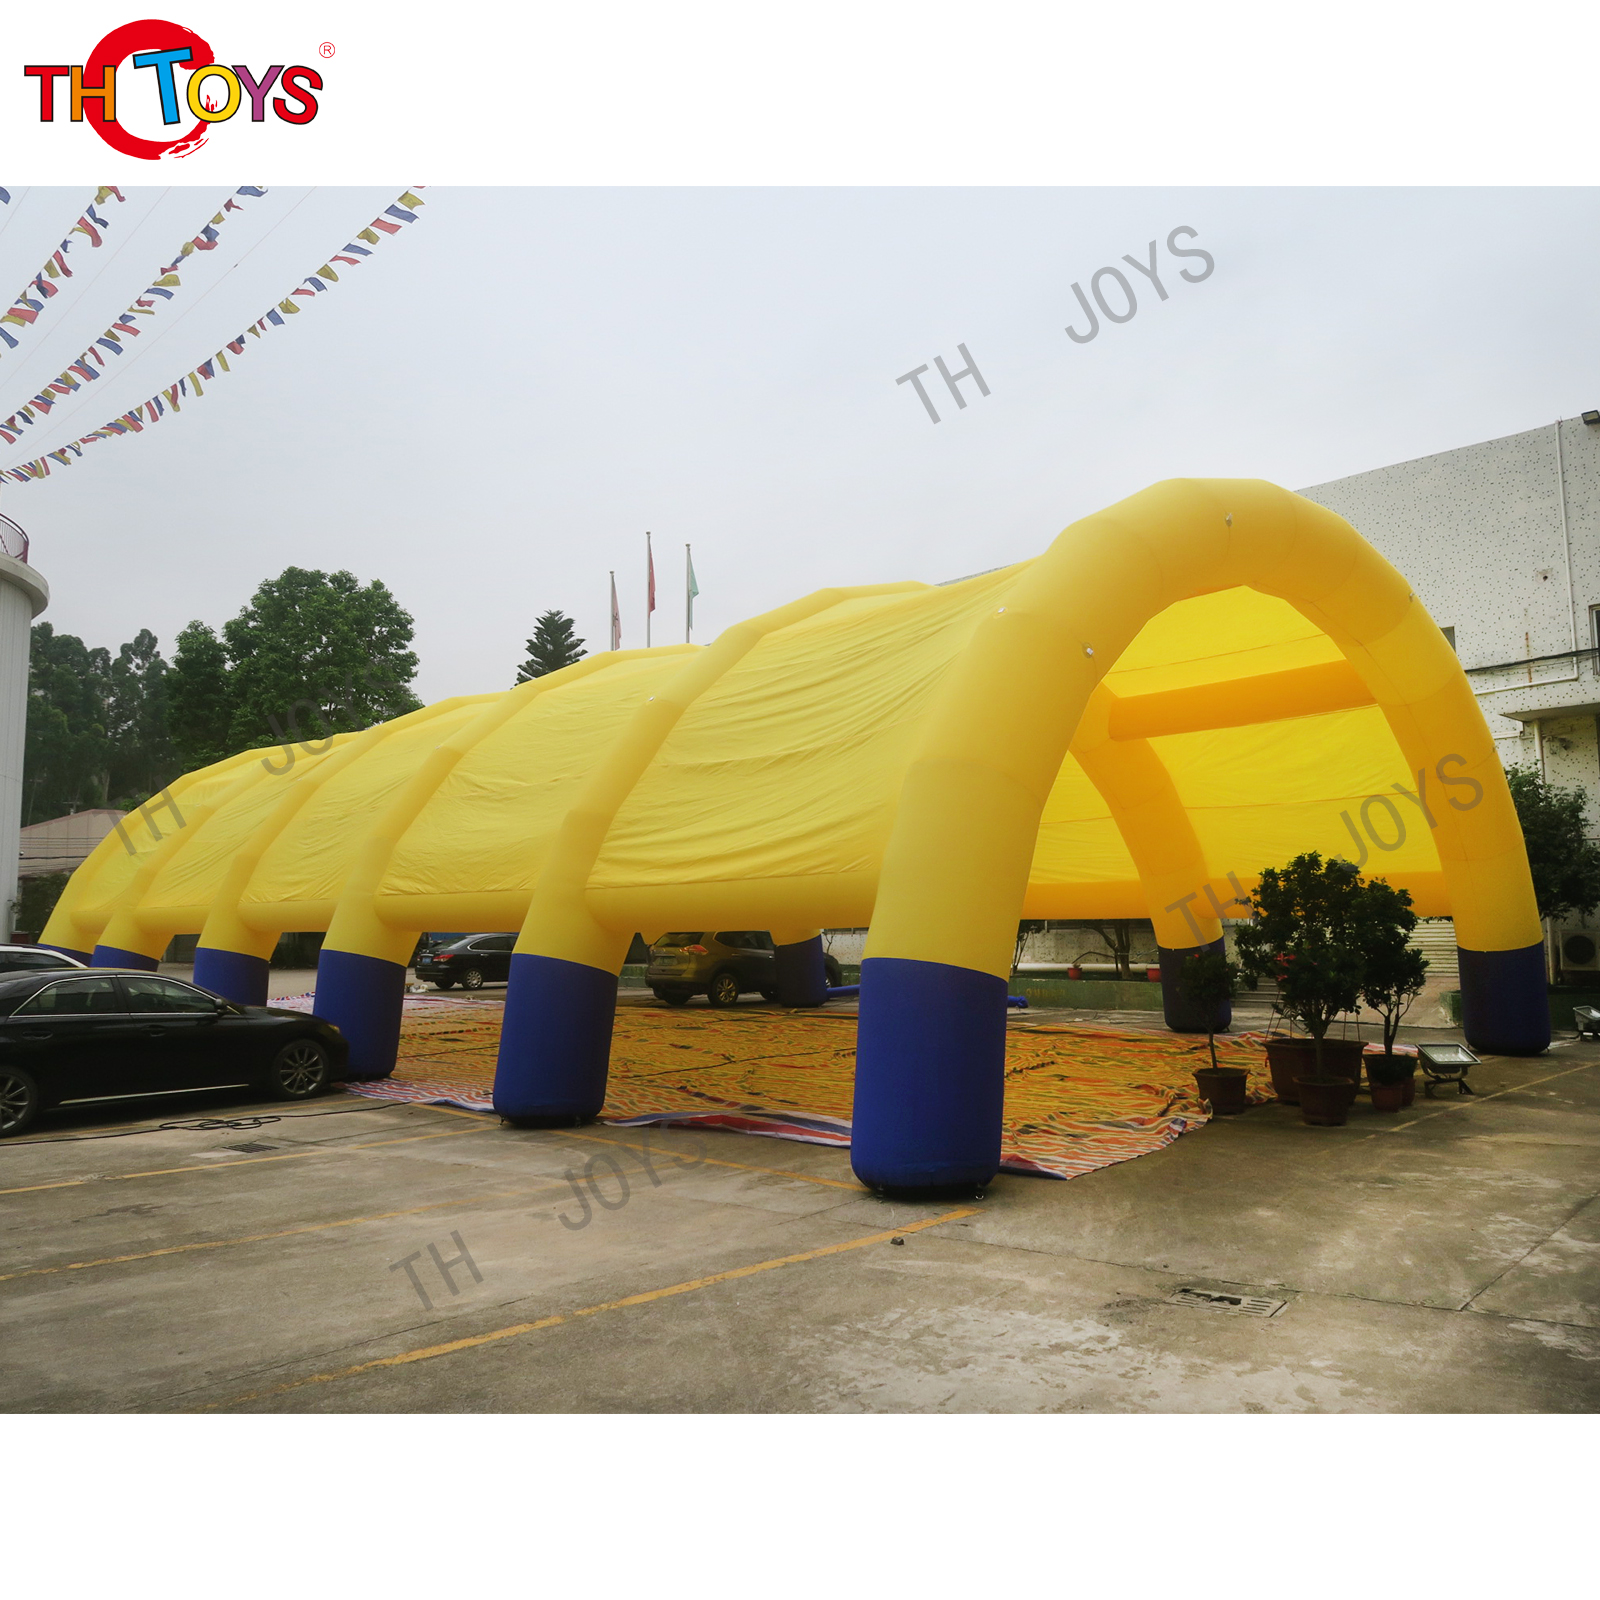 Inflatable spider tents06